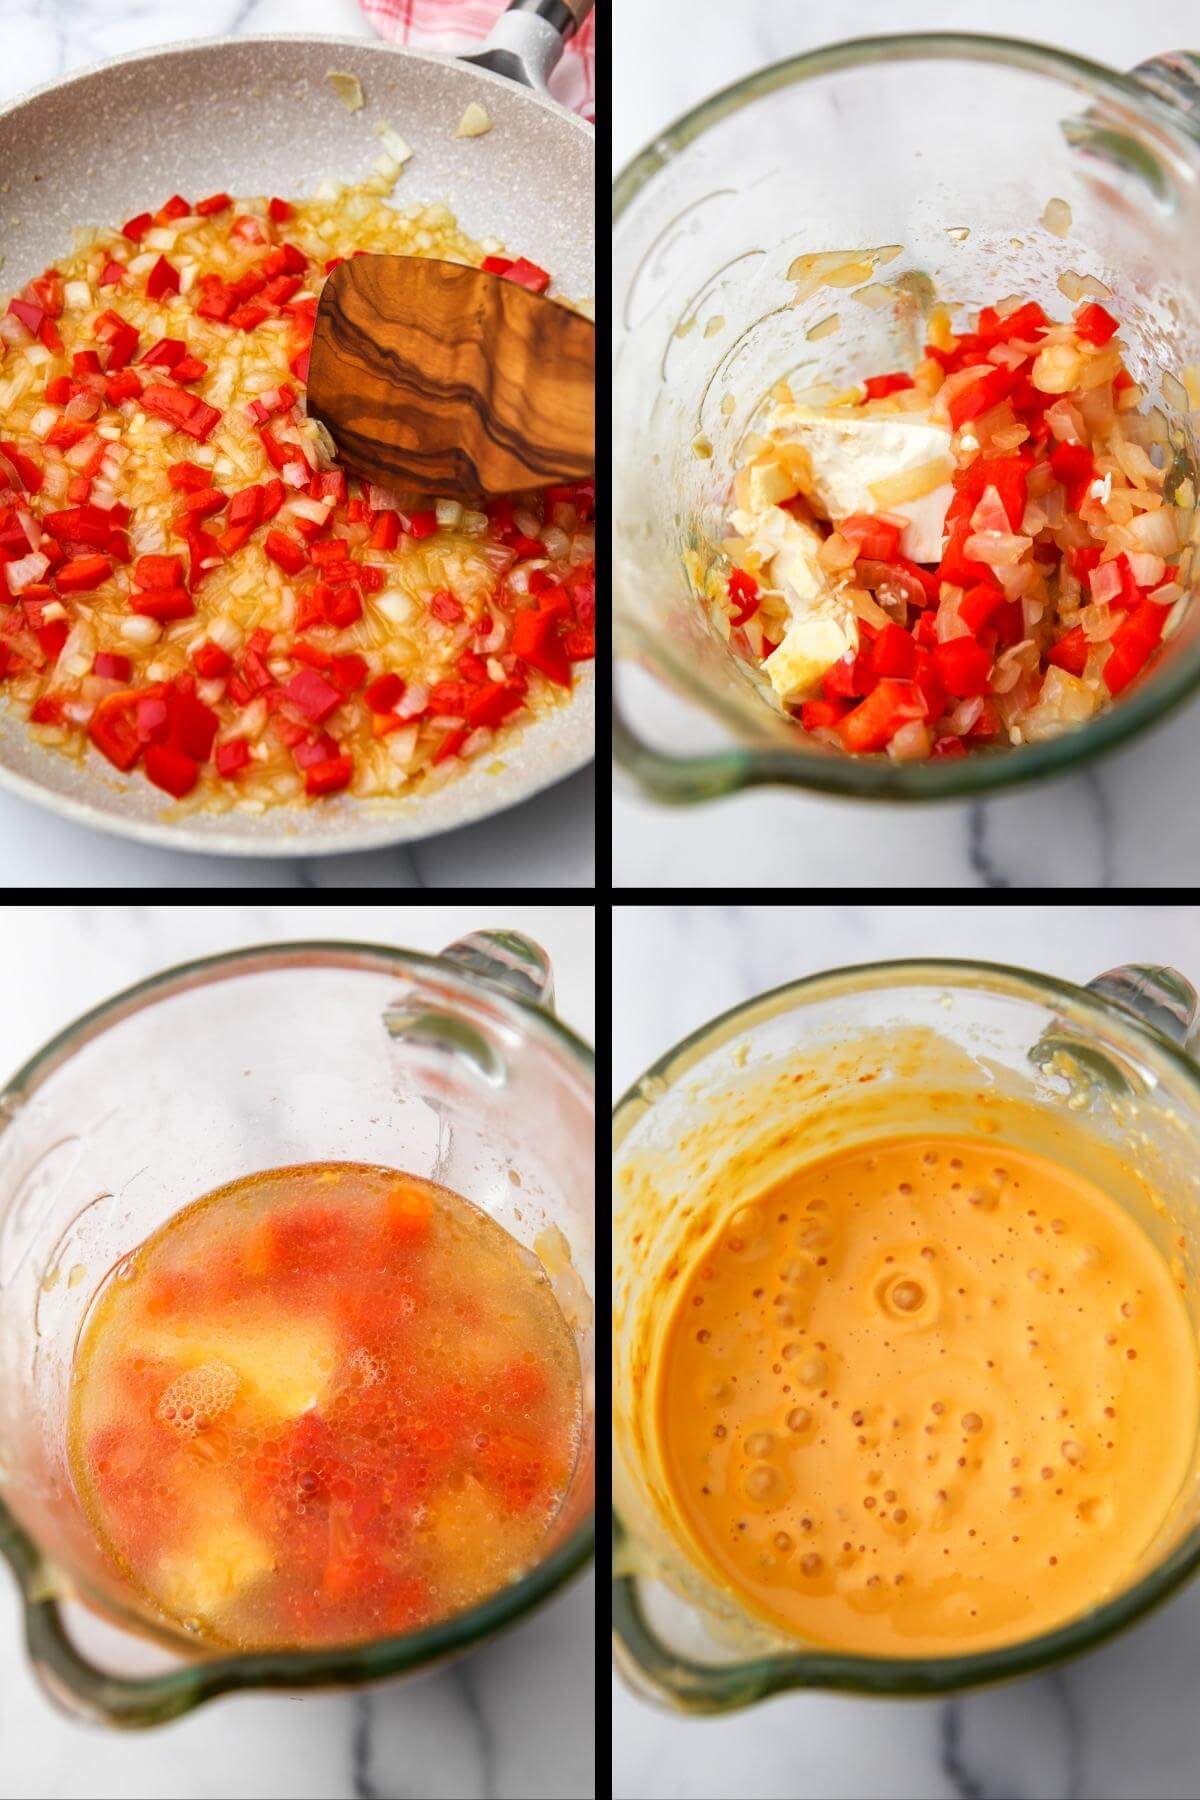 A collage of 4 images showing the process of sauting onion, garlic, and red pepper, and adding it to a blender with tofu water and spices to make a mac and cheese sauce.